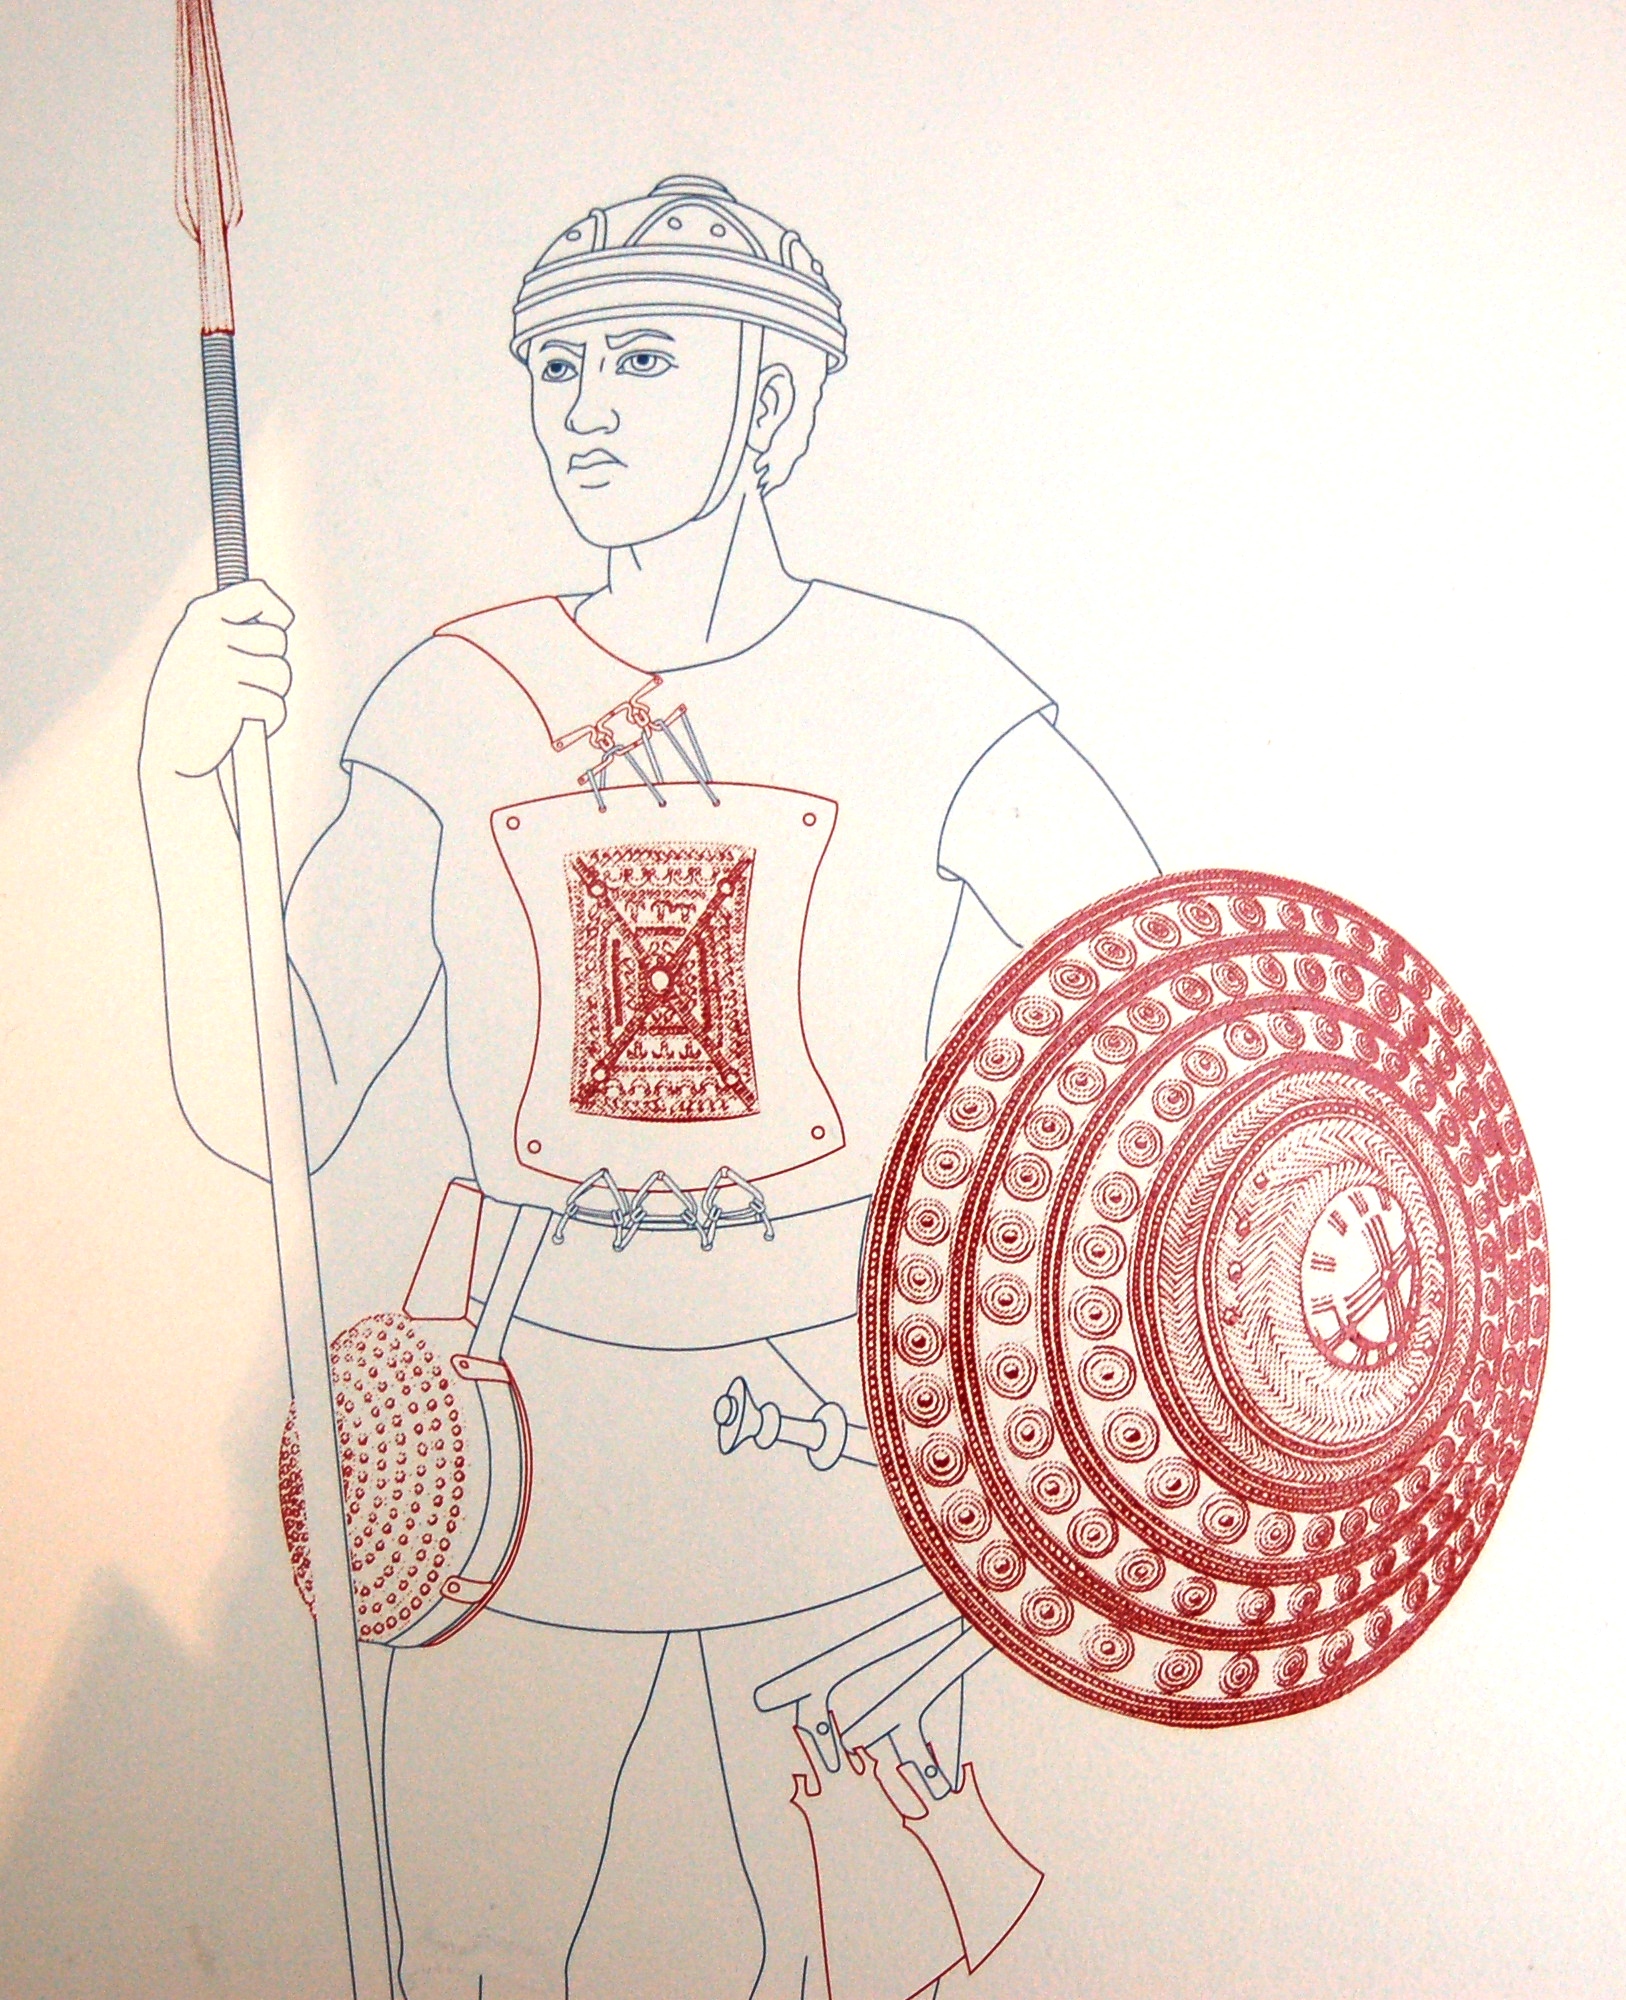 Drawing of Etruscan soldier's military gear, Berlin